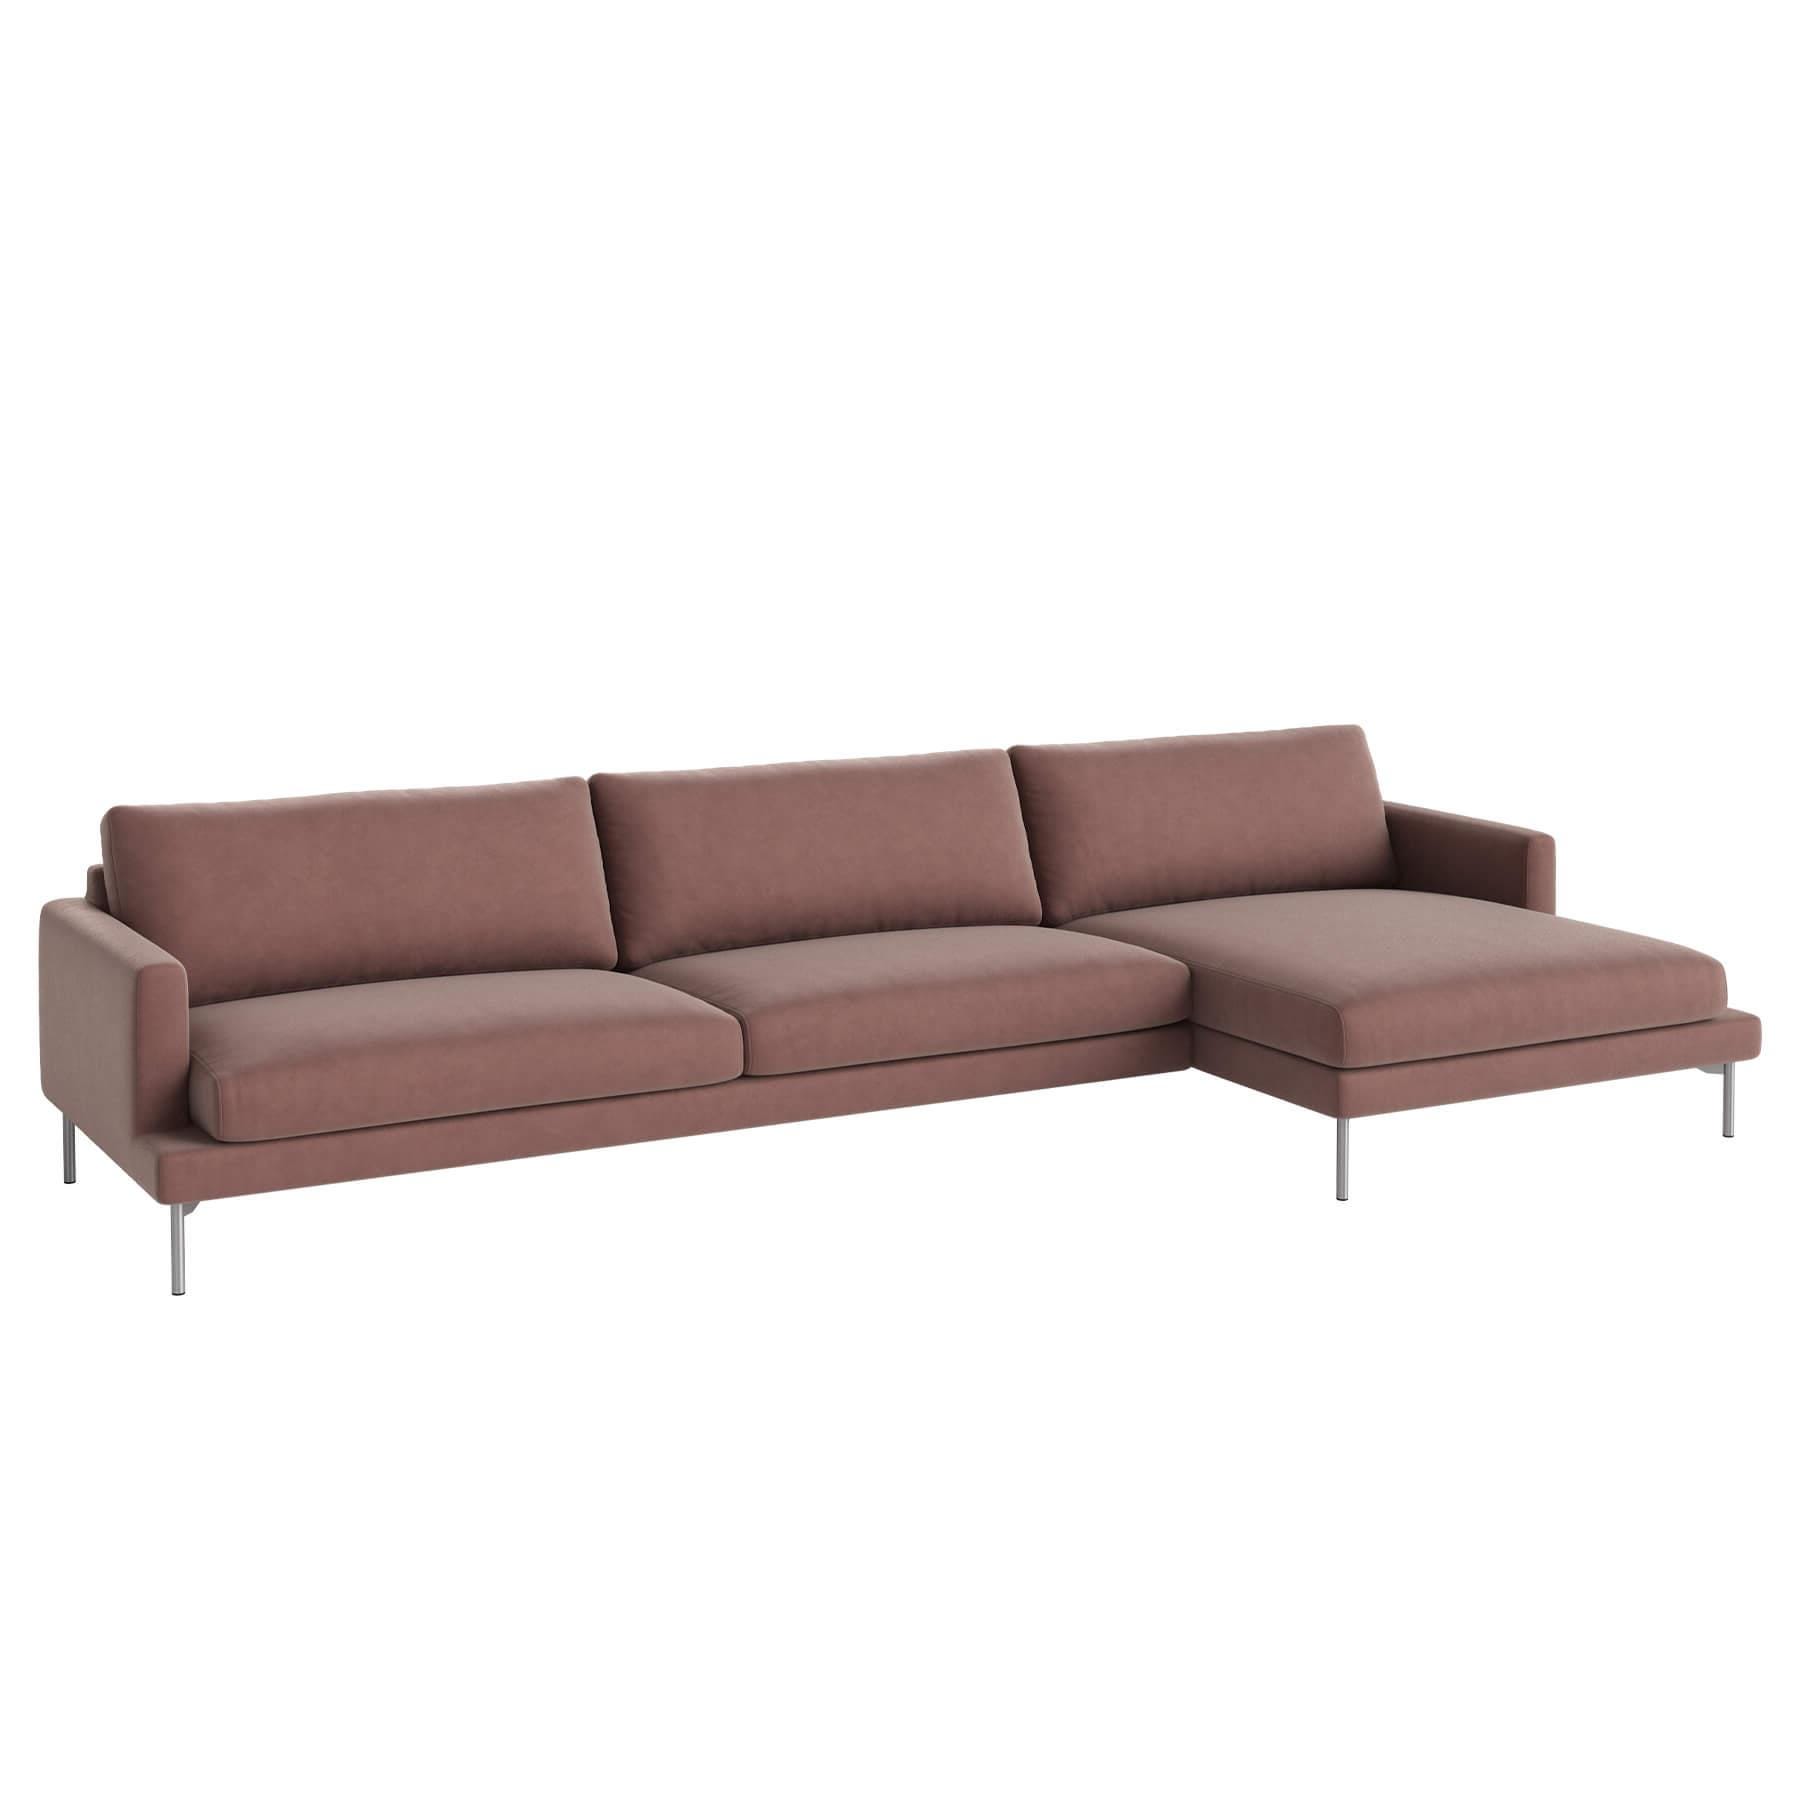 Bolia Veneda Sofa 45 Seater Sofa With Chaise Longue Brushed Steel Ritz Light Rosa Right Pink Designer Furniture From Holloways Of Ludlow